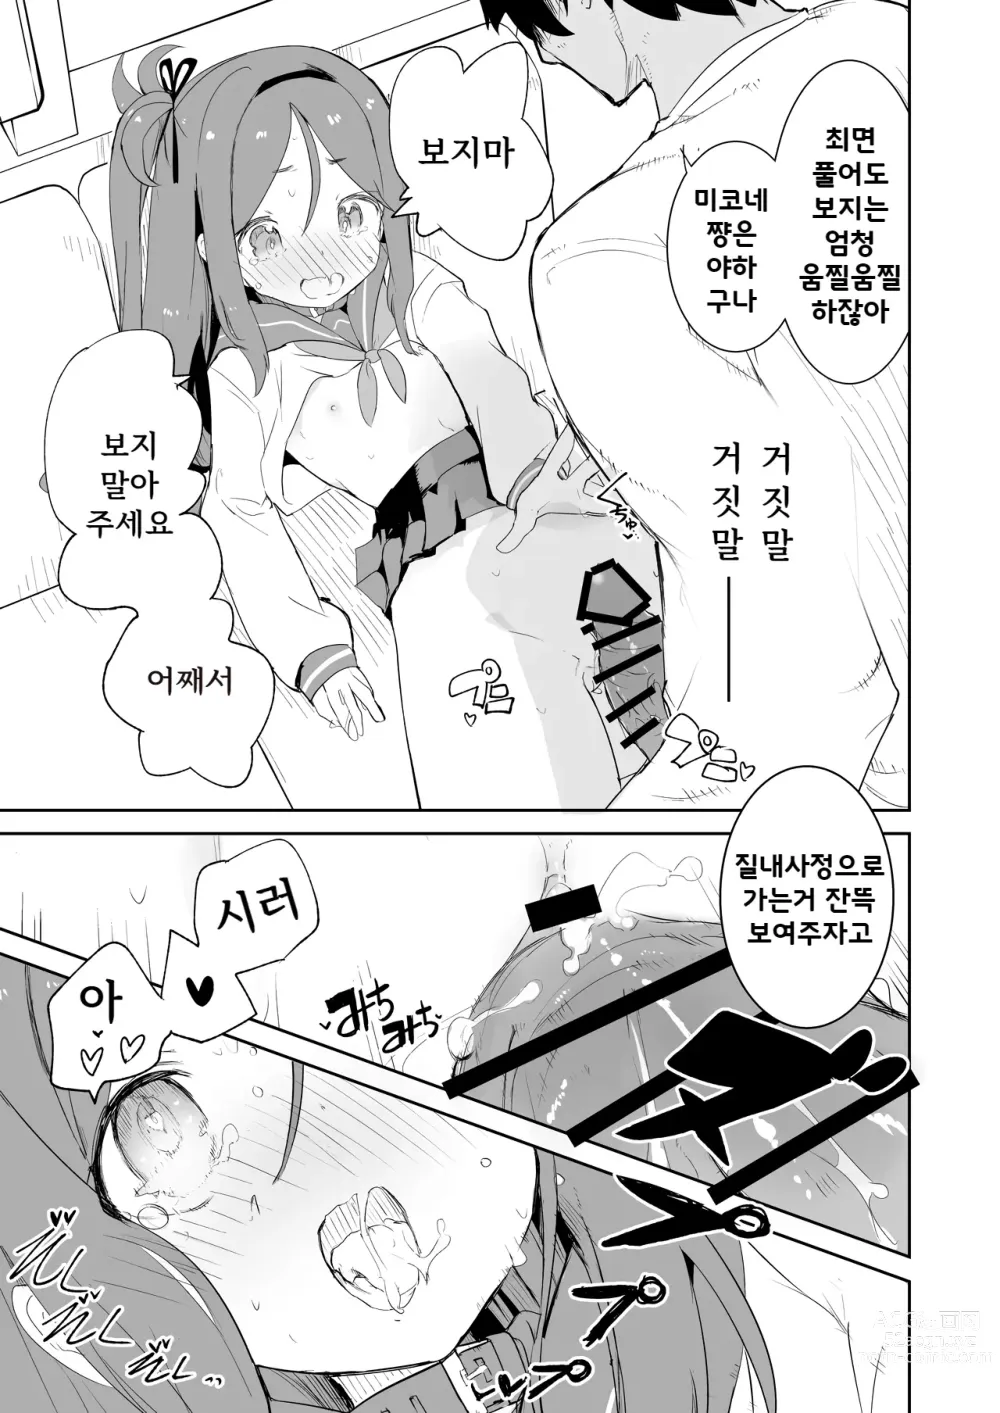 Page 24 of doujinshi S.S.S.X